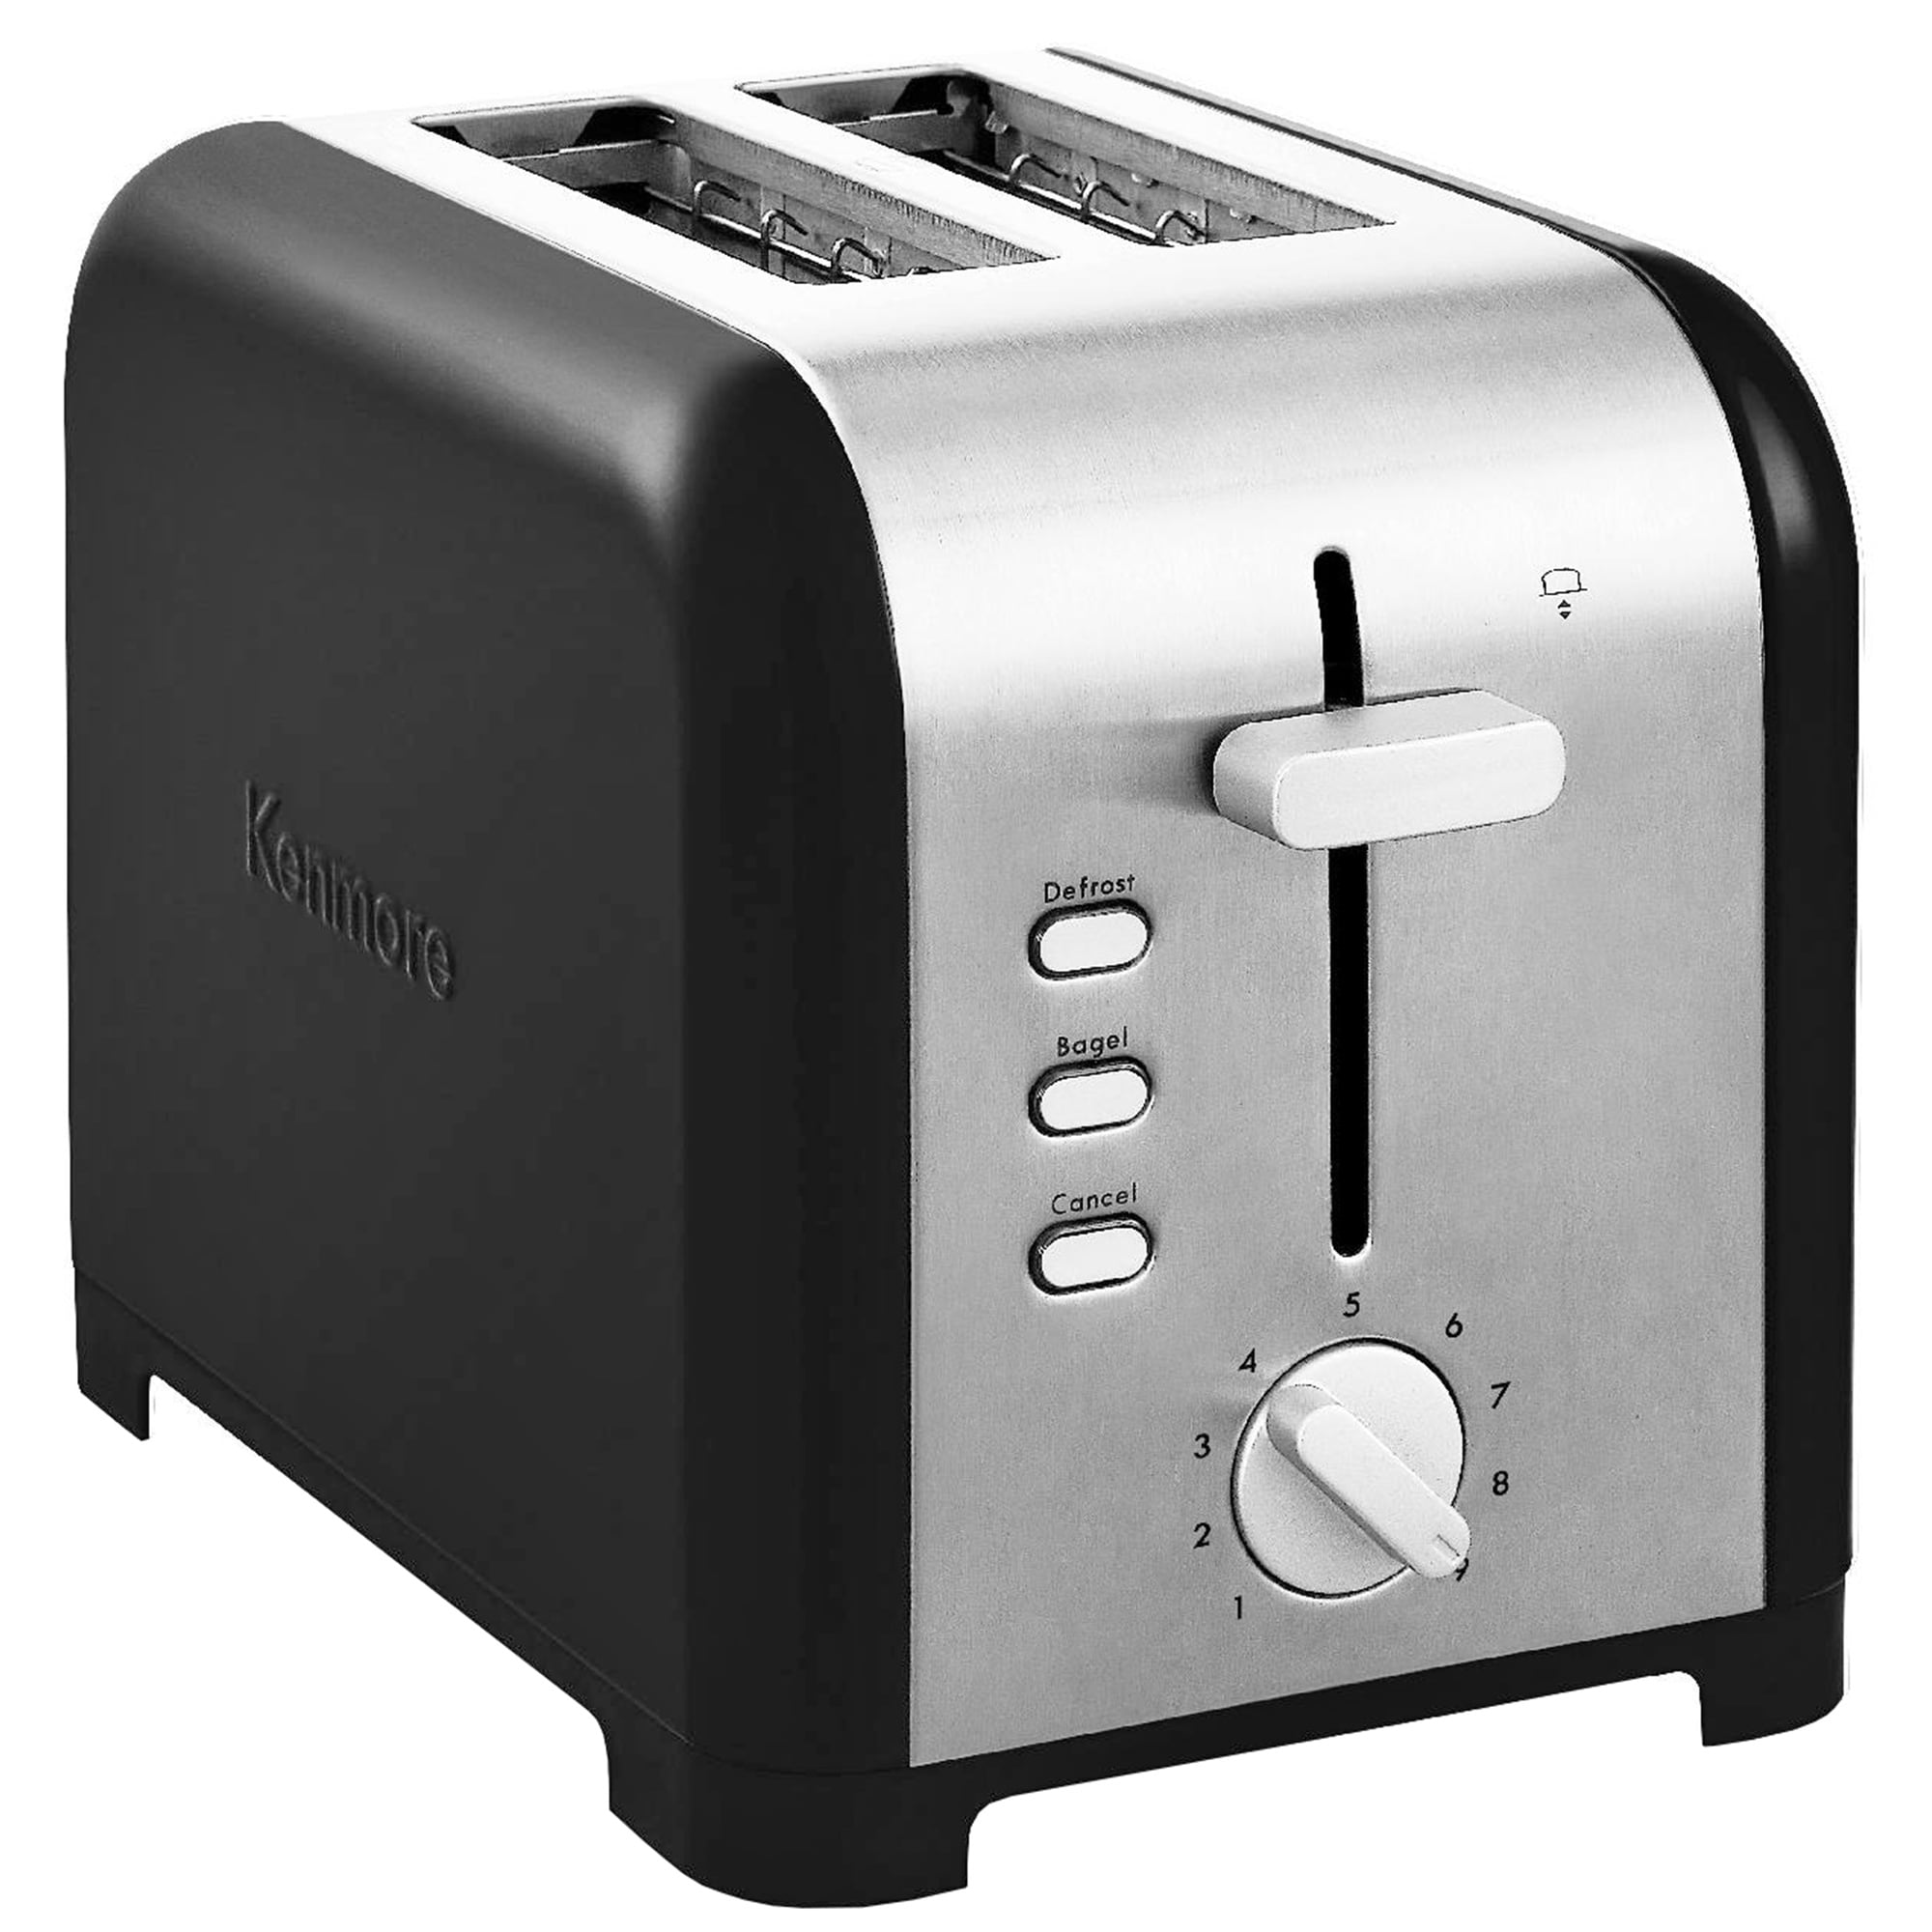 Kenmore Extra-Wide 2-Slice Toaster - White / Stainless Steel